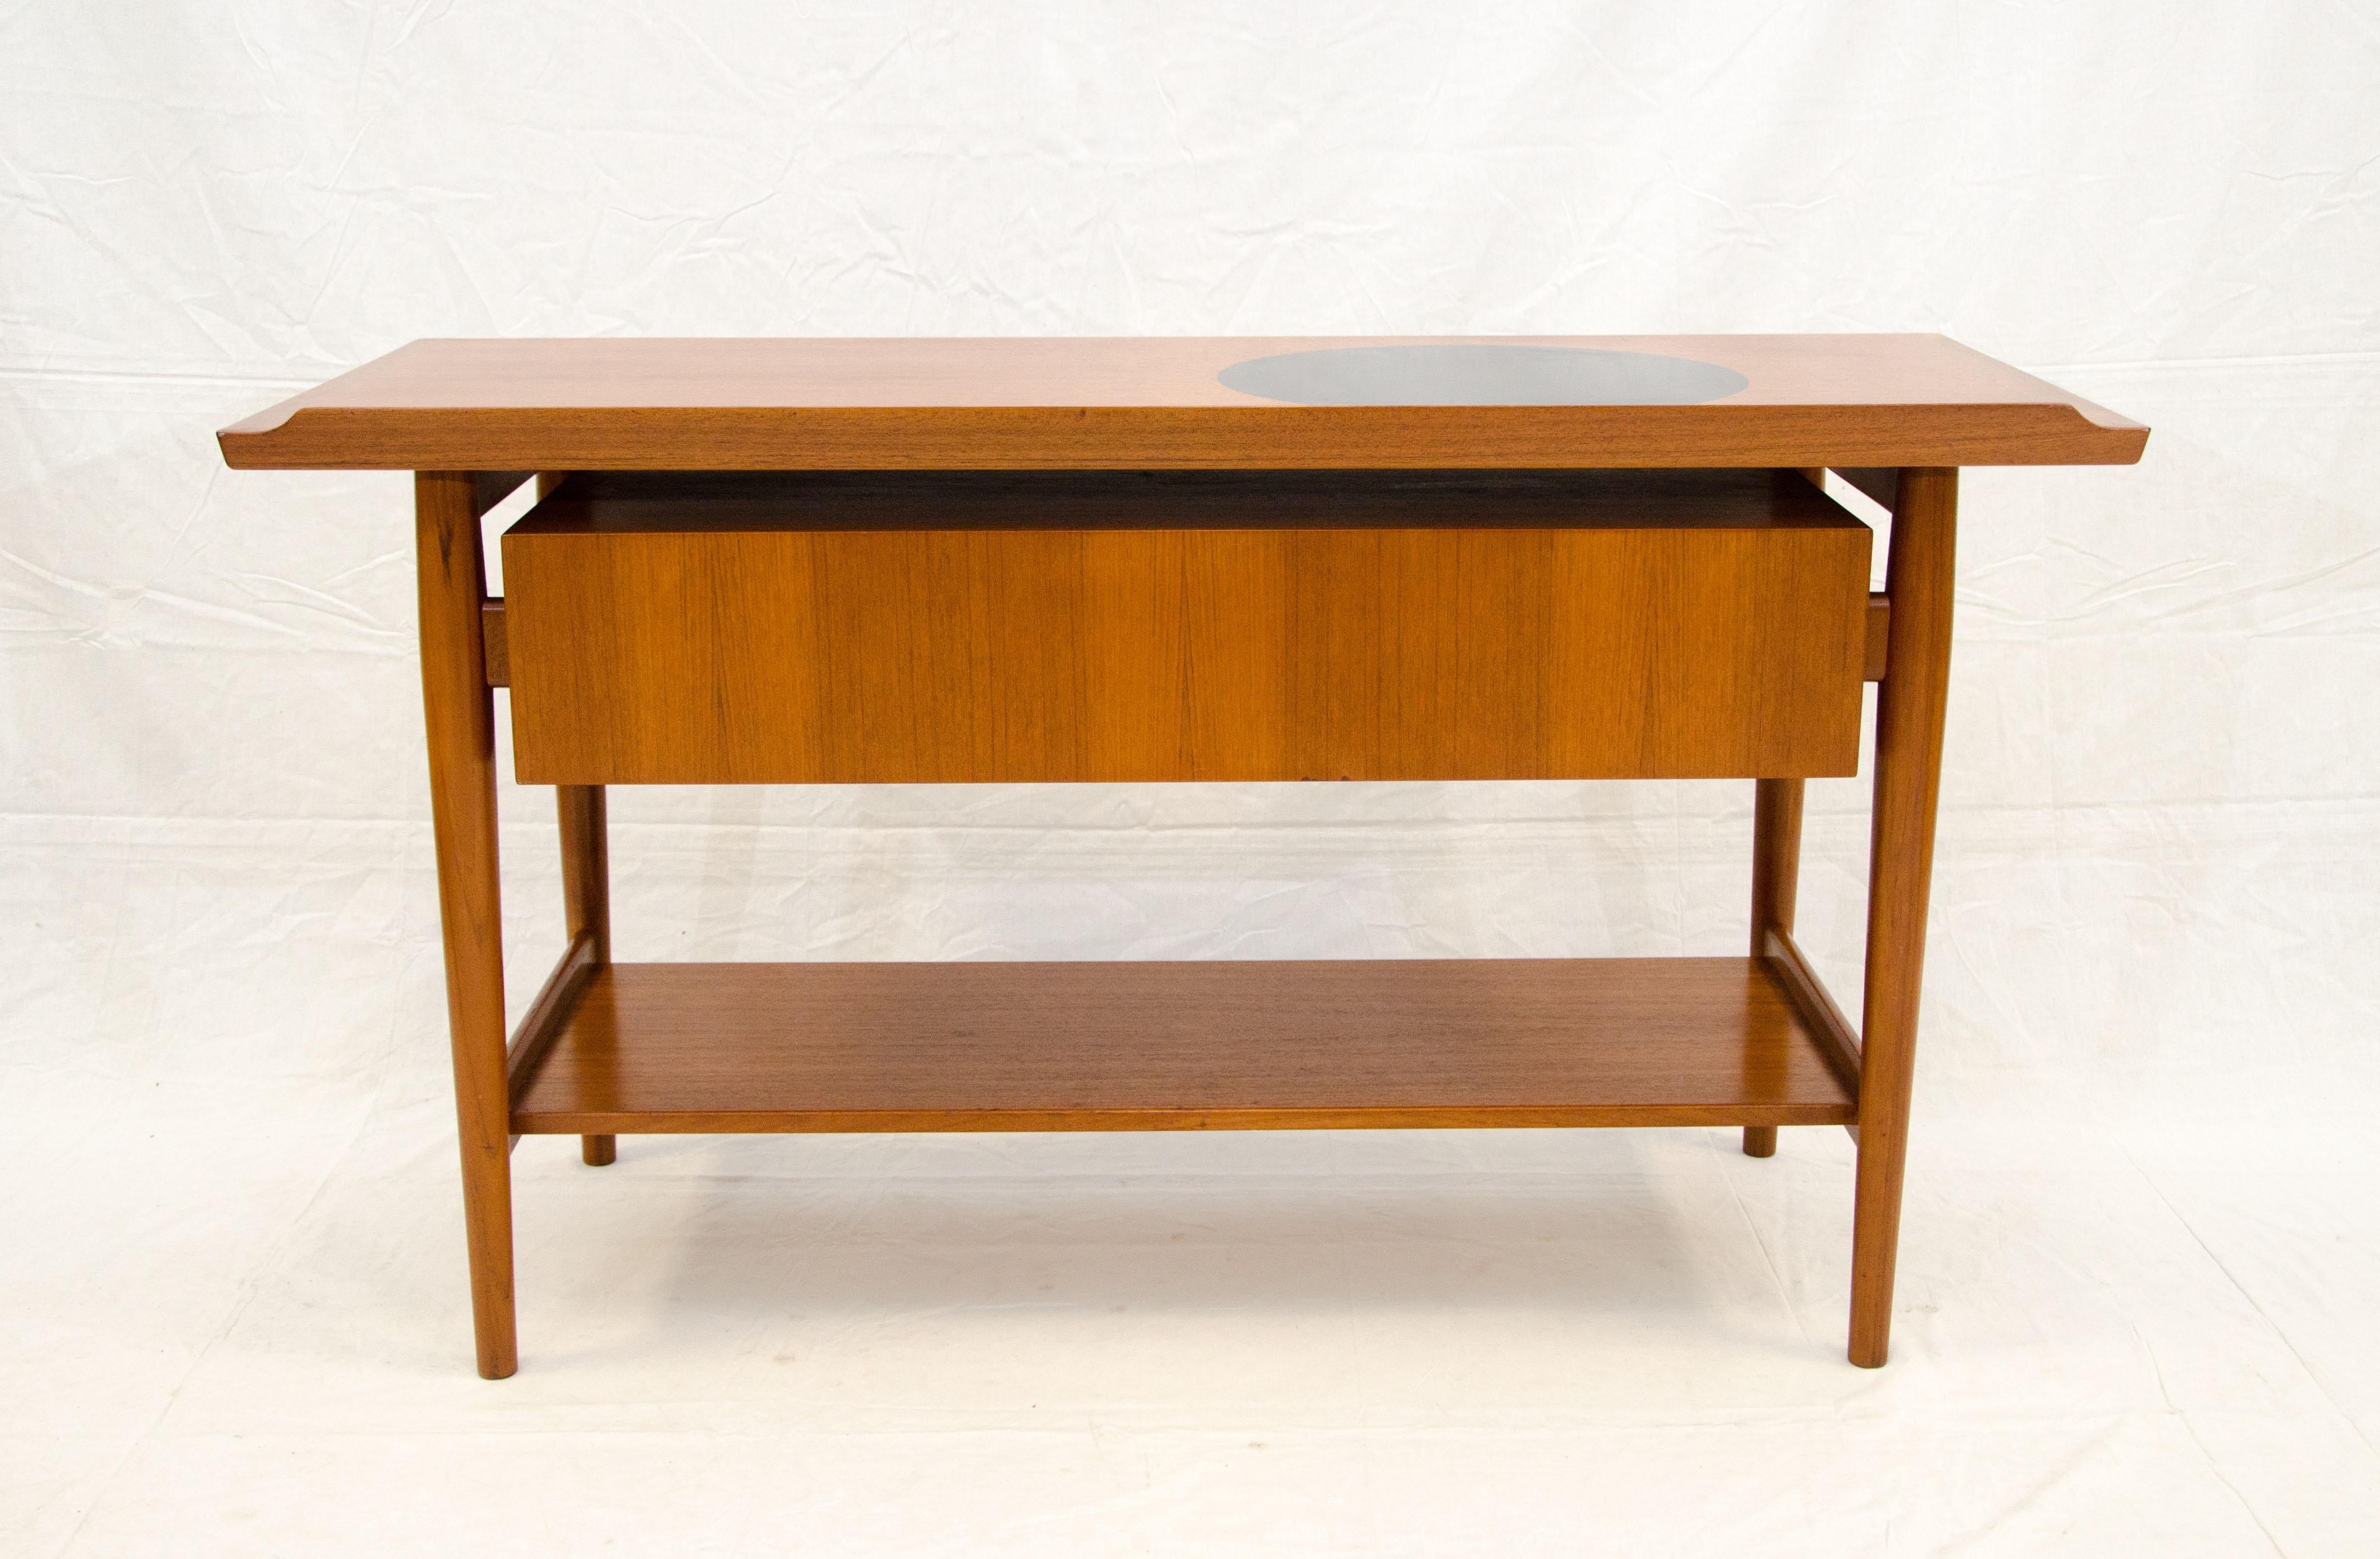 20th Century Unusual Danish Teak Buffet or Console Table by Arne Vodder for Sibast Furniture